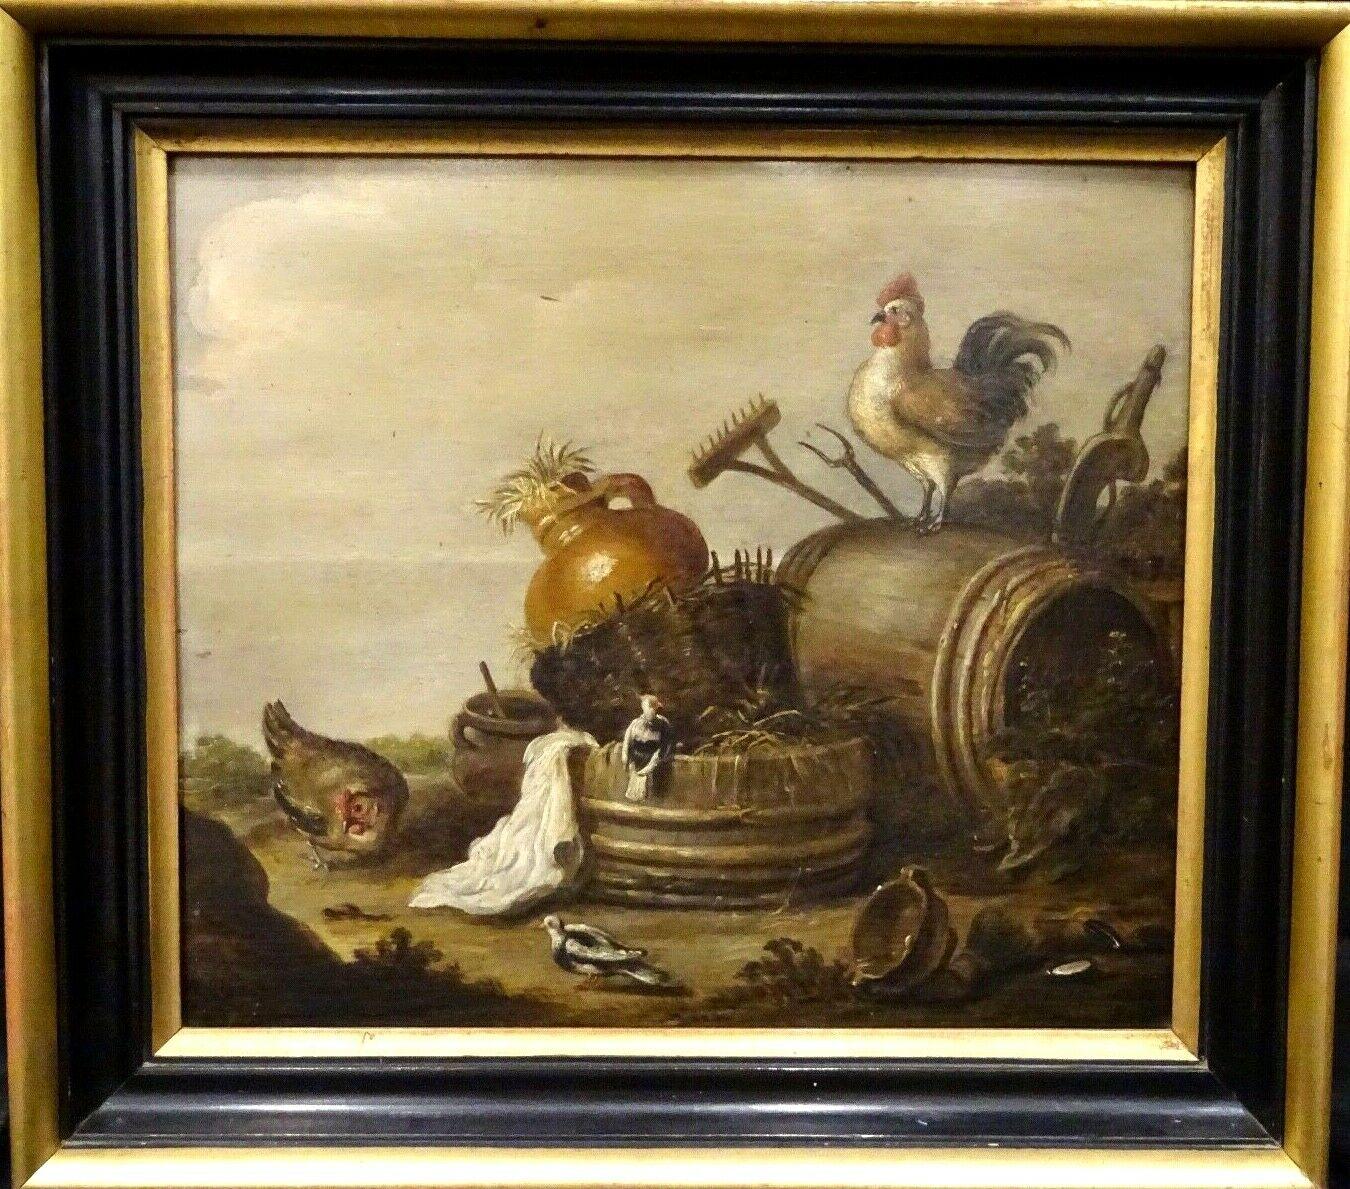 Chickens & Other Birds In A Farmyard, 18th Century - Painting by Marmaduke Cradock